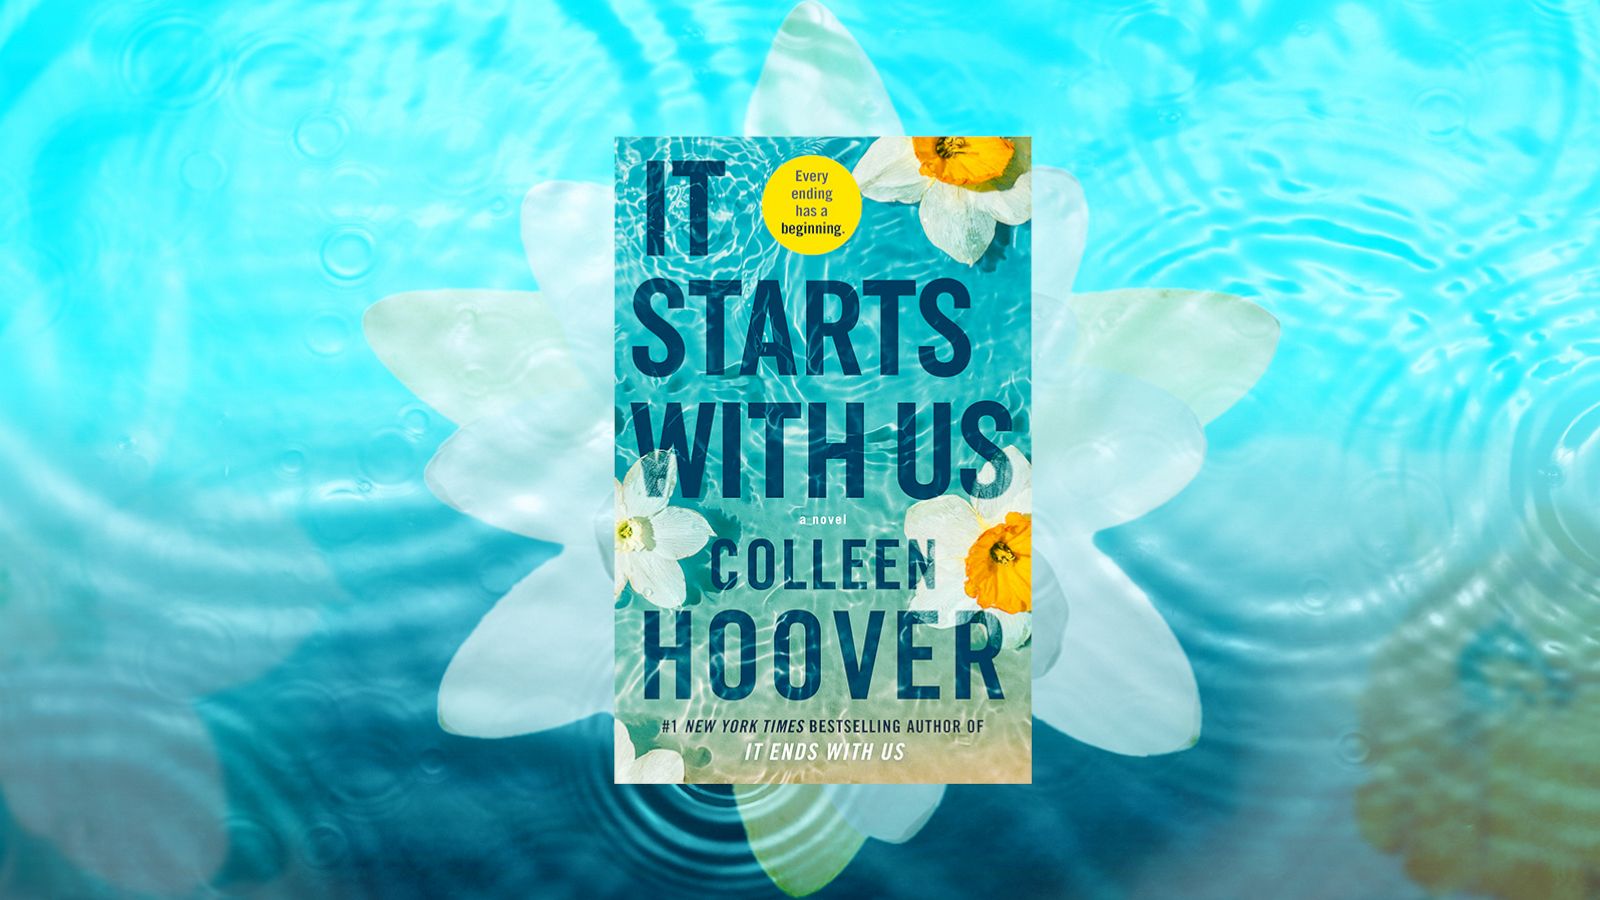 Exclusive 1st excerpt of Colleen Hoovers new book, It Starts with